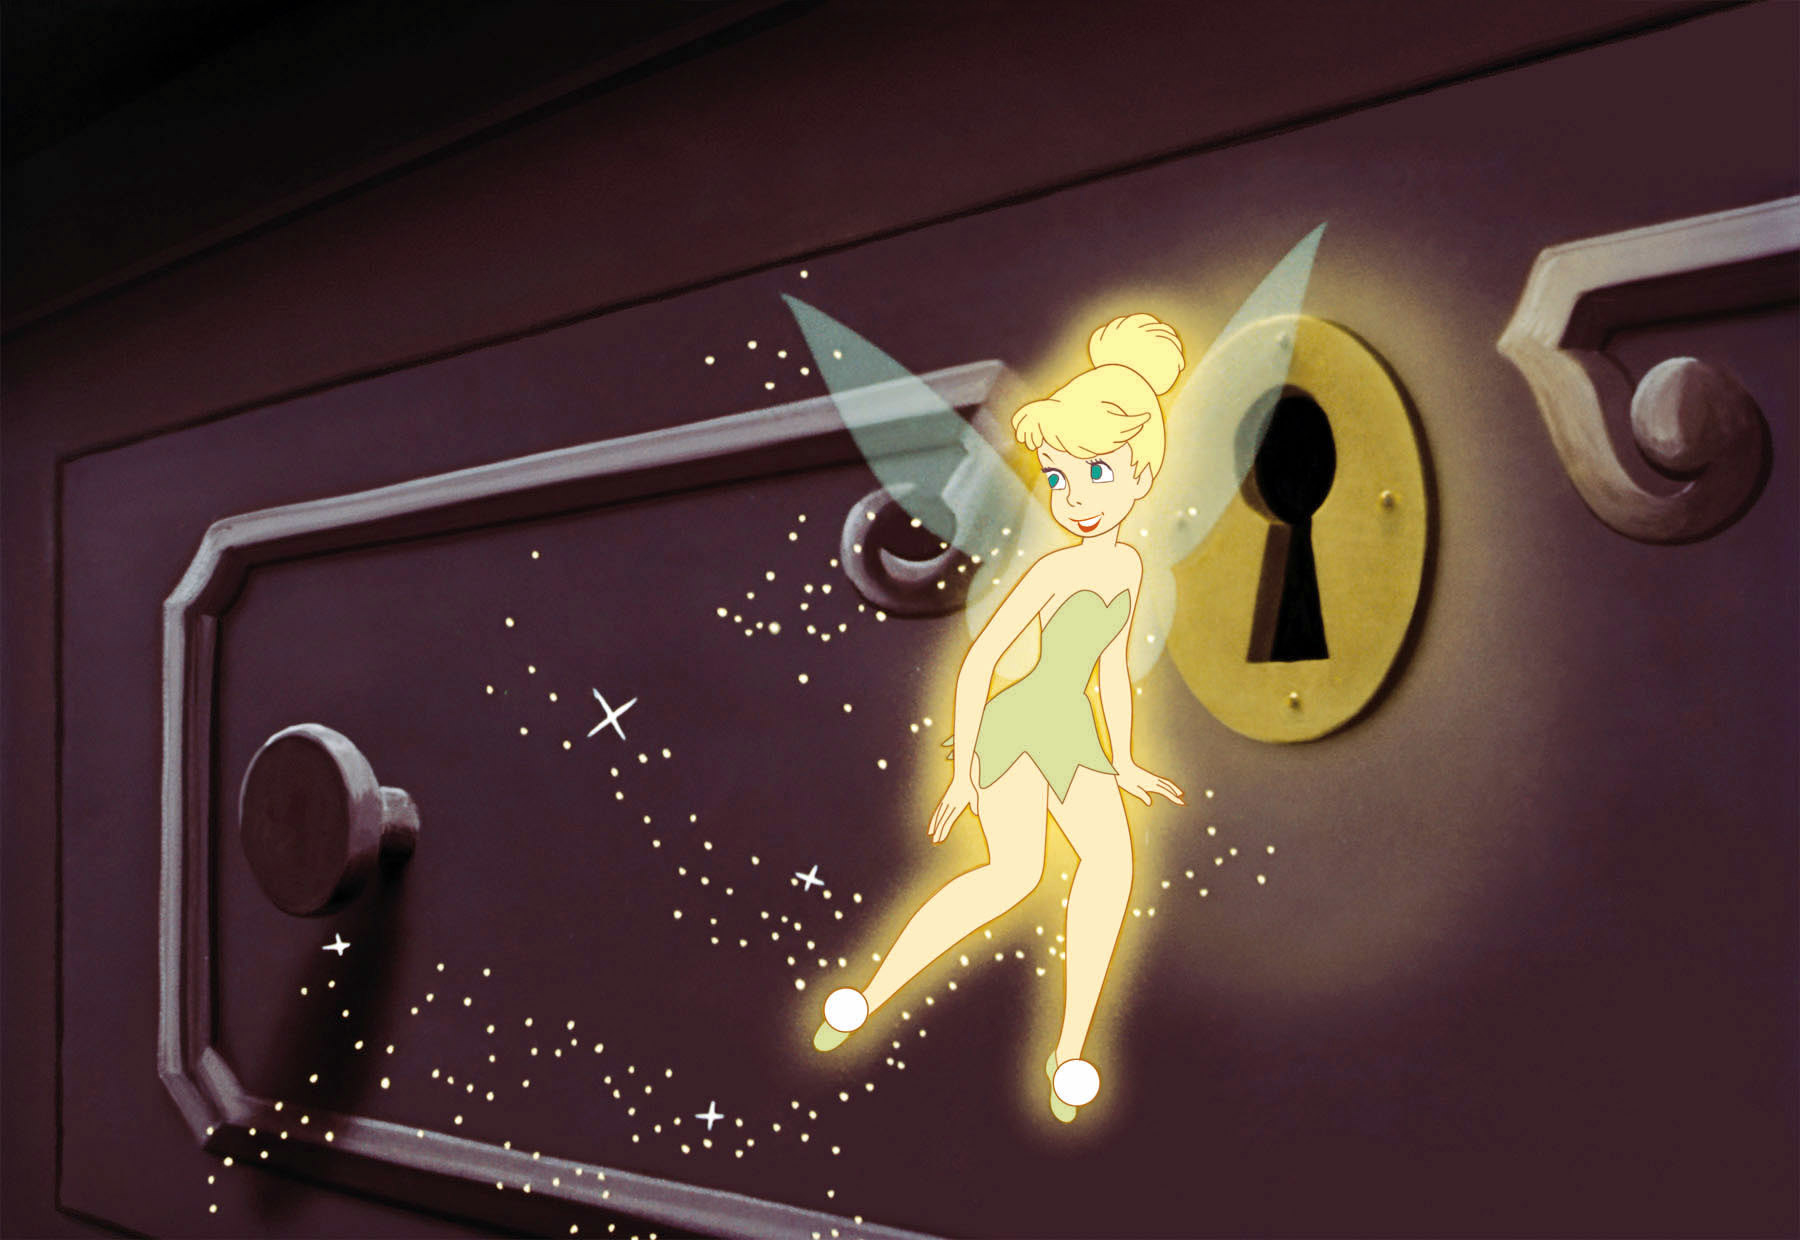 Tinker Bell from Peter Pan. 